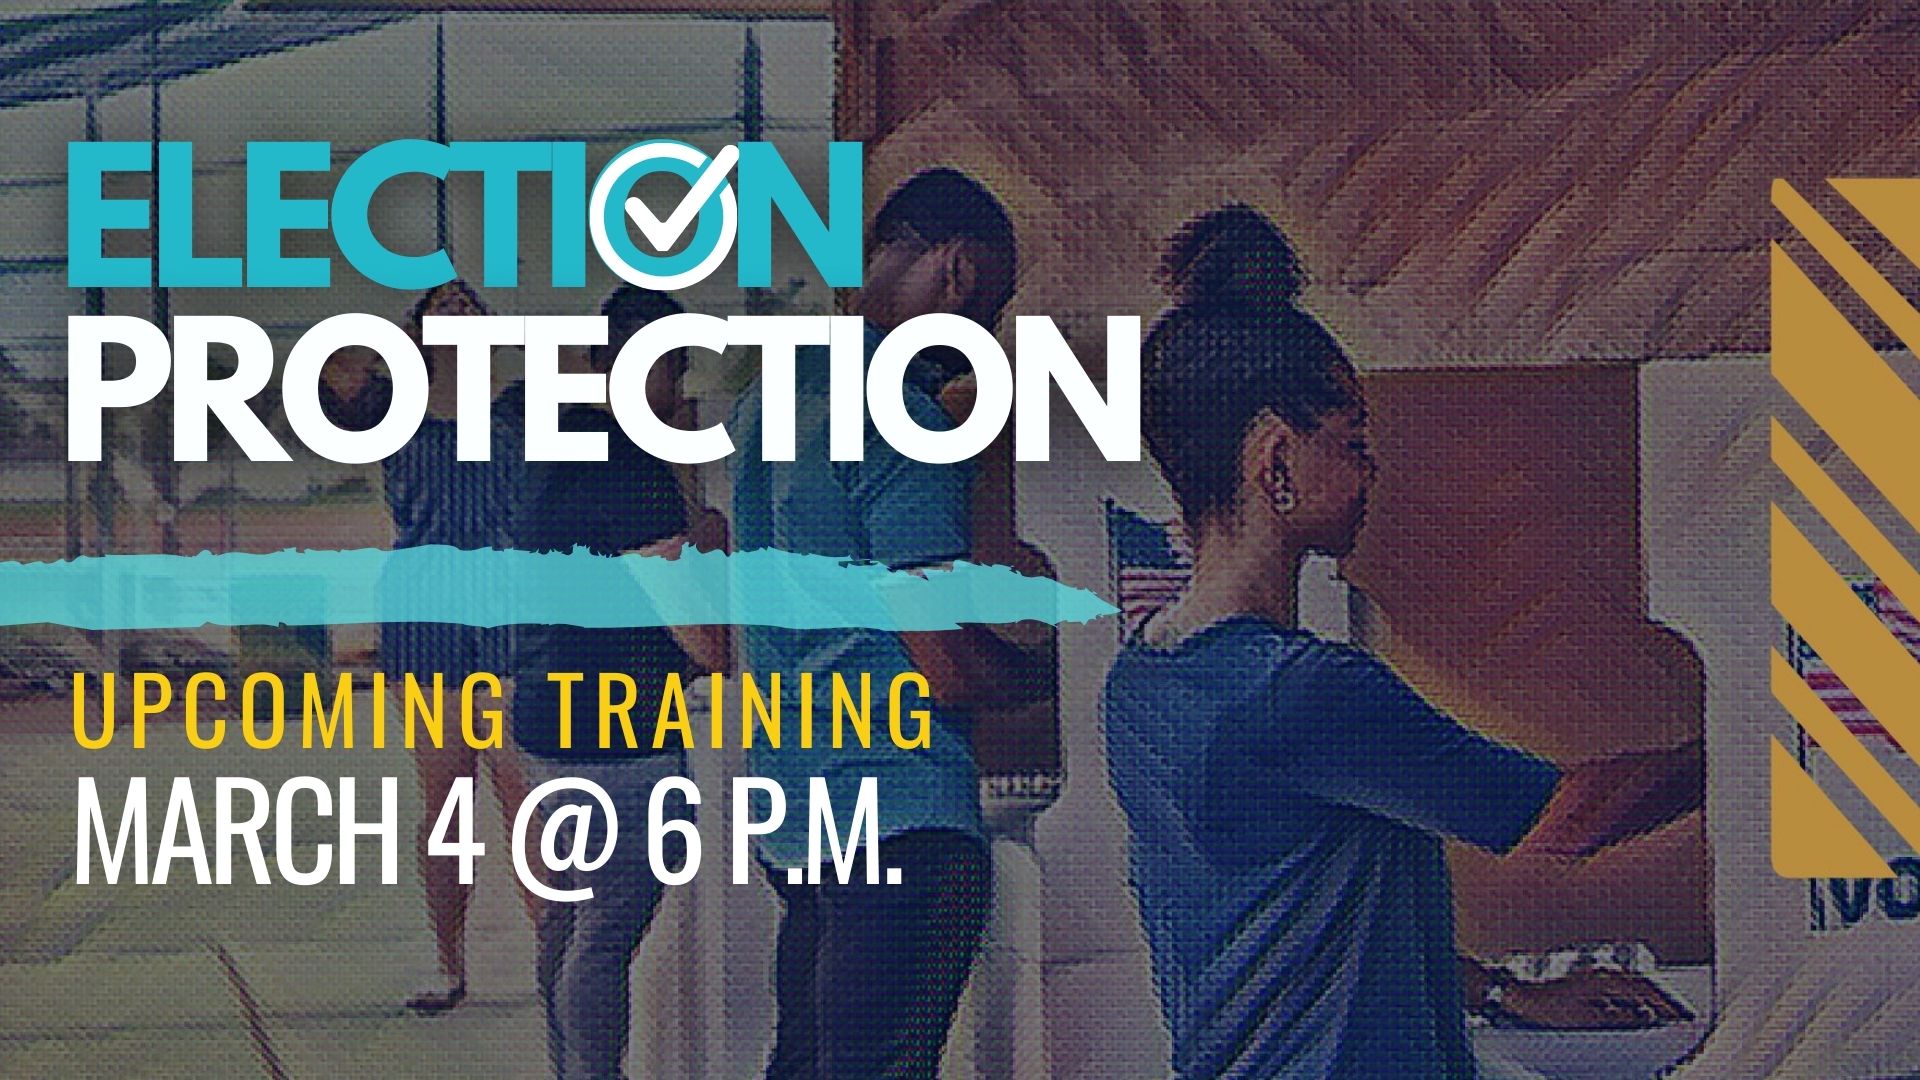 Election Protection Training on March 4 at 6 p.m. via zoom.